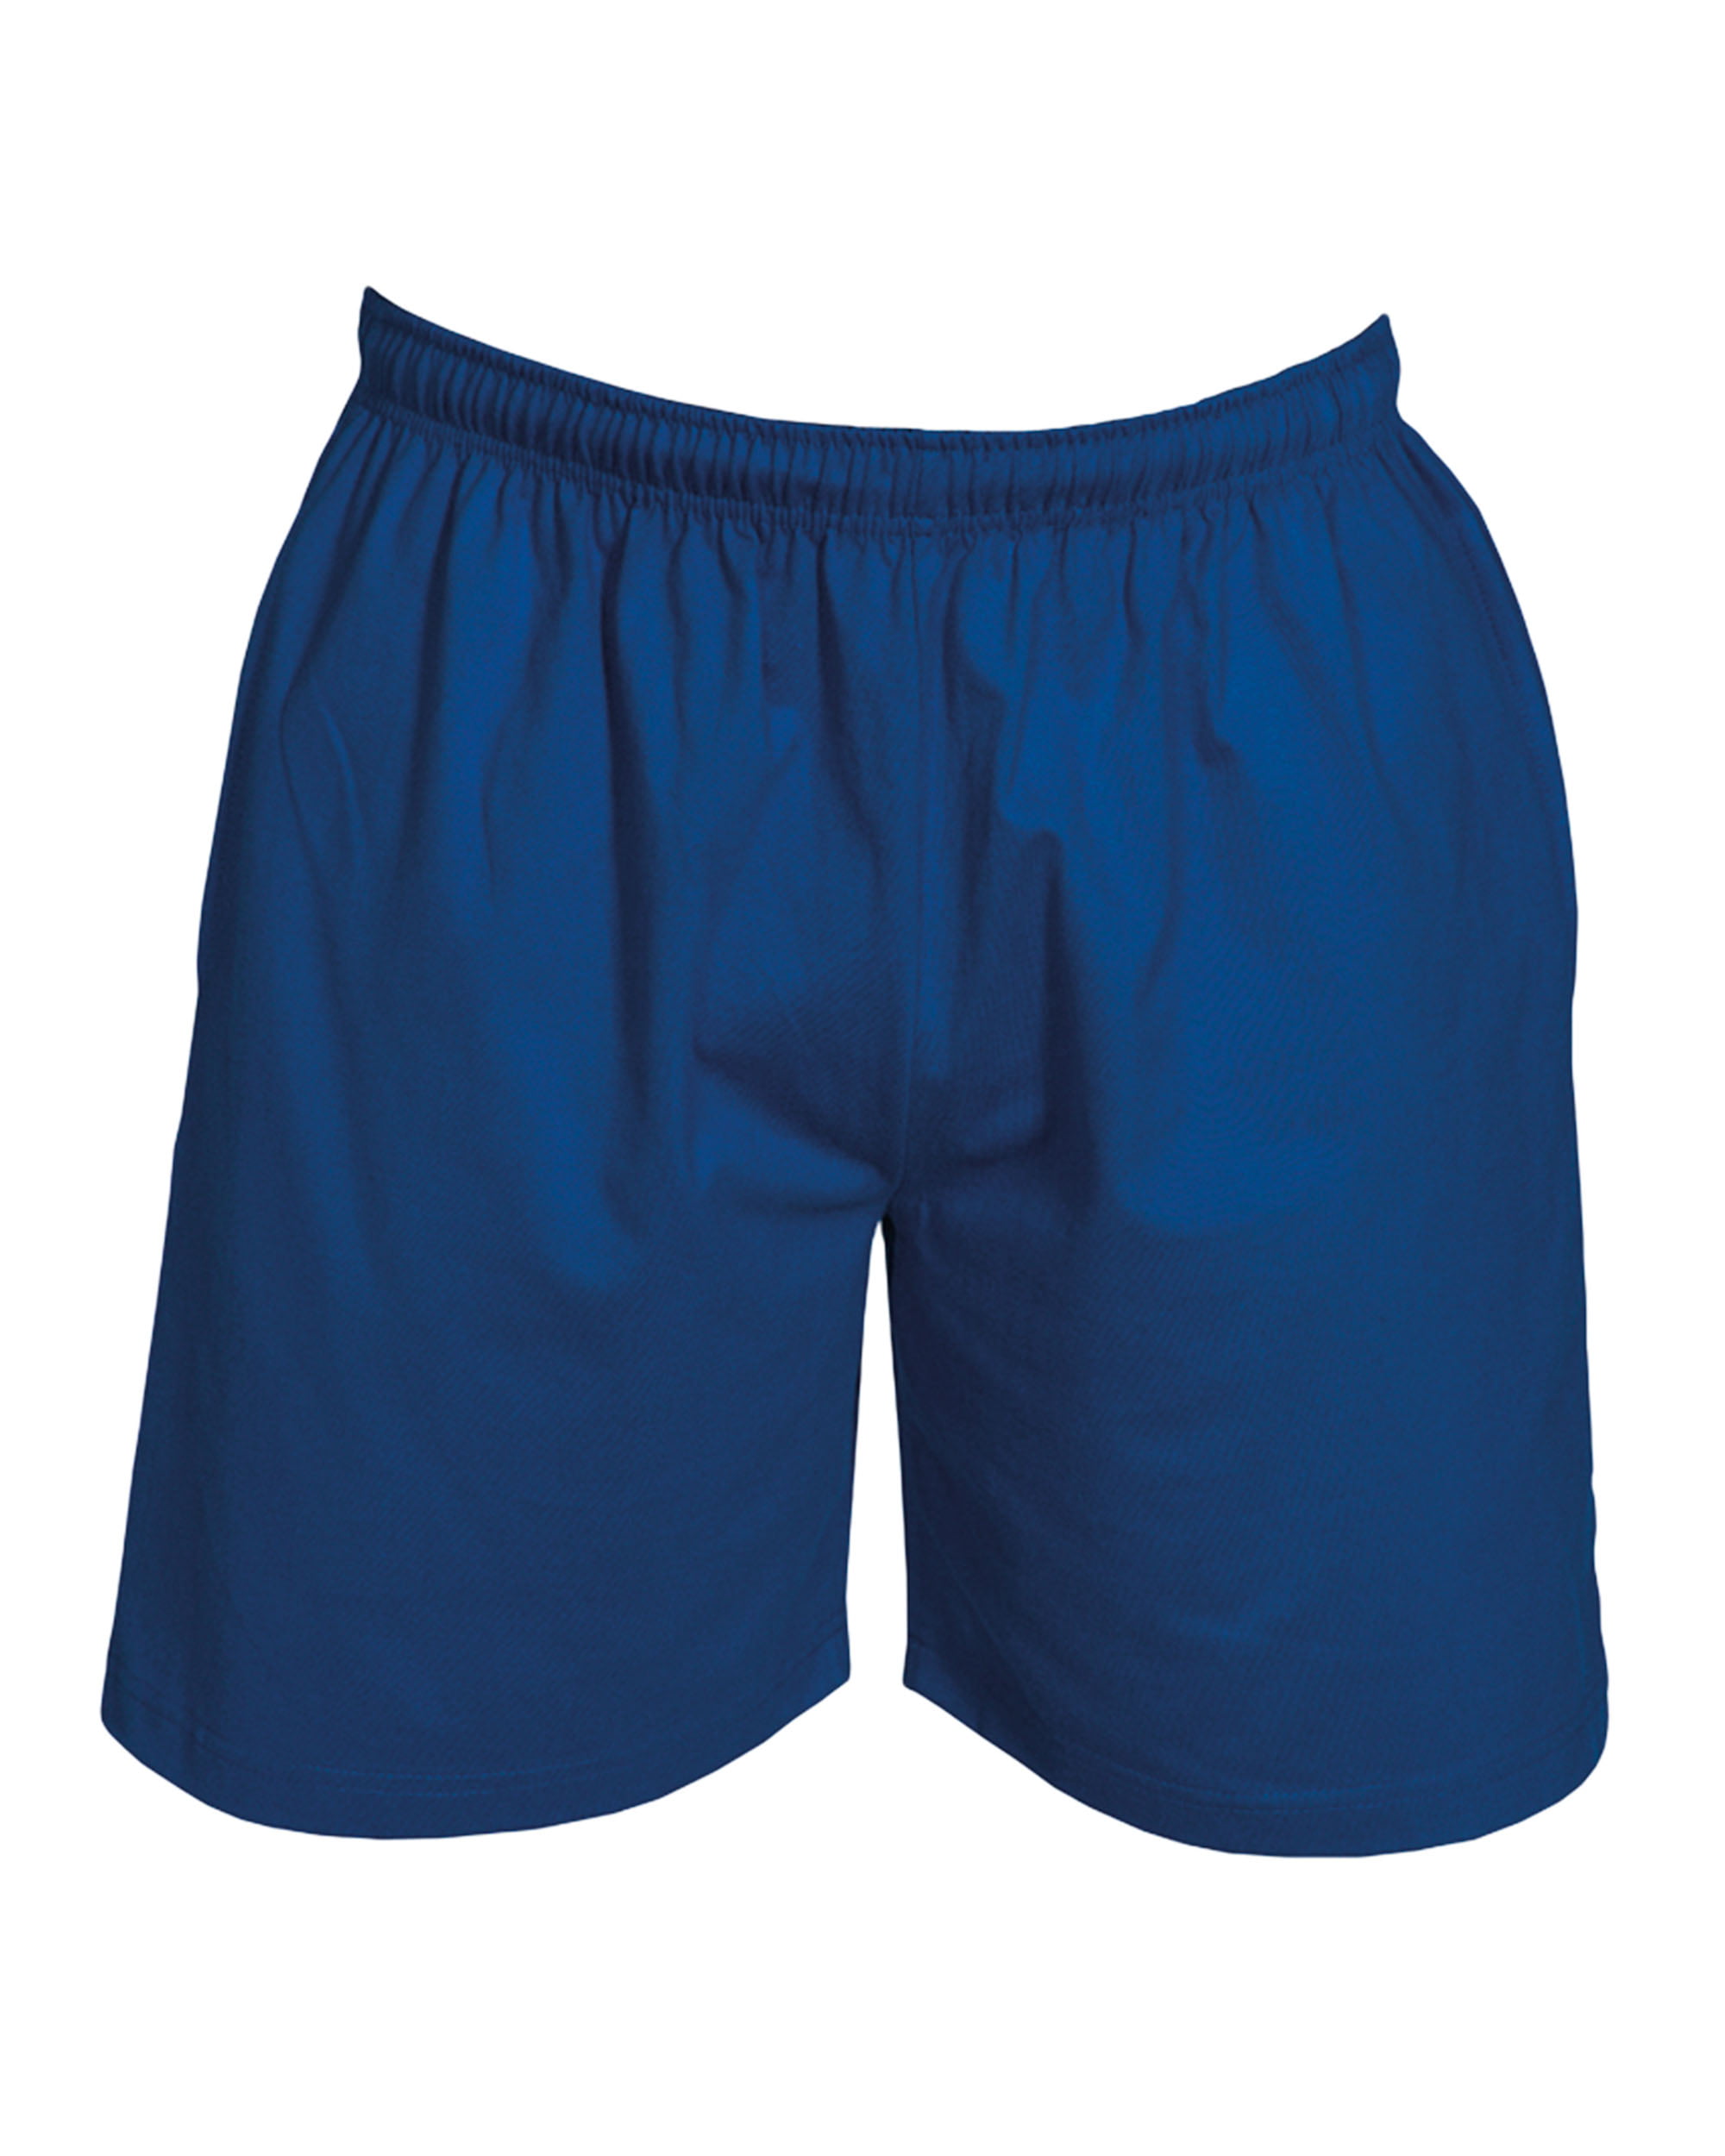 Men's Sport Shorts With Pockets - 100% Cotton - Adjustable Draw Cord No  Mesh Liner - SIZING RUNS SMALL ORDER THE NEXT SIZE UP - Walmart.com